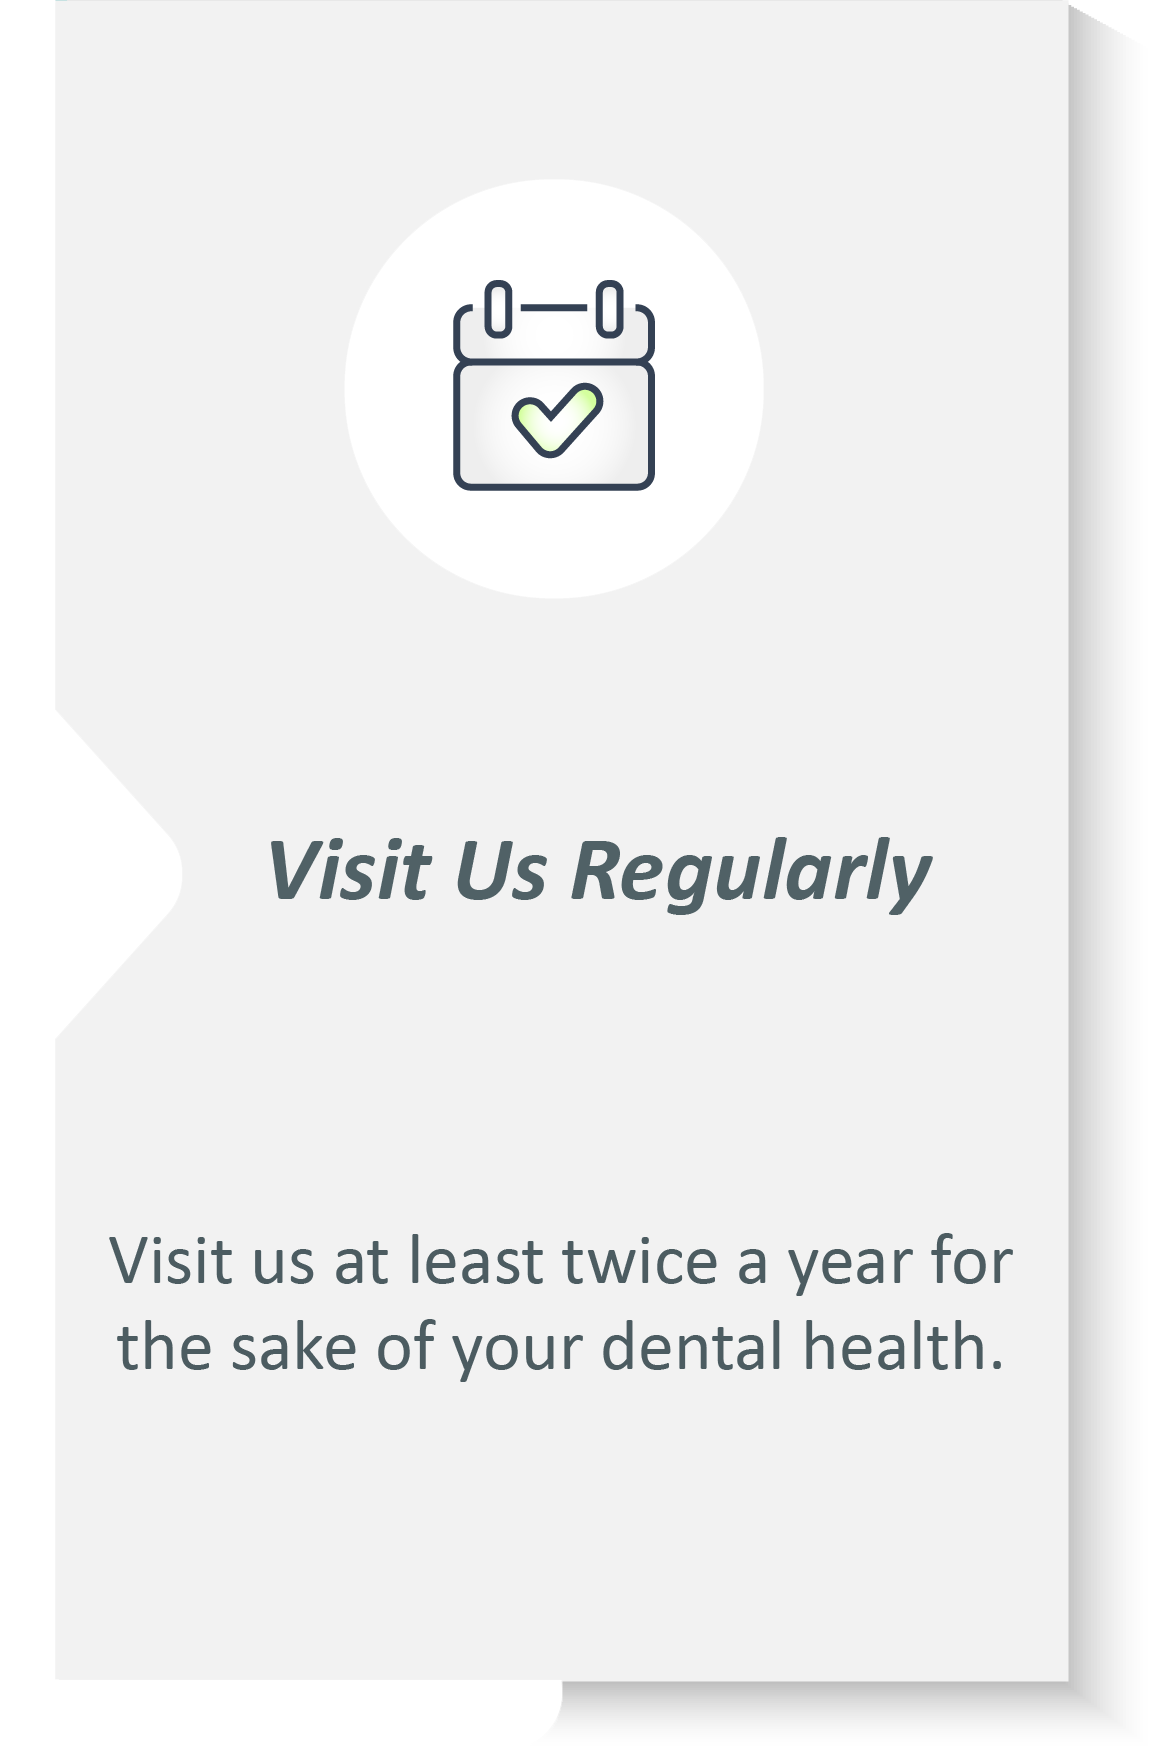 Family dentist infographic: Visit us at least twice a year for the sake of your dental health.